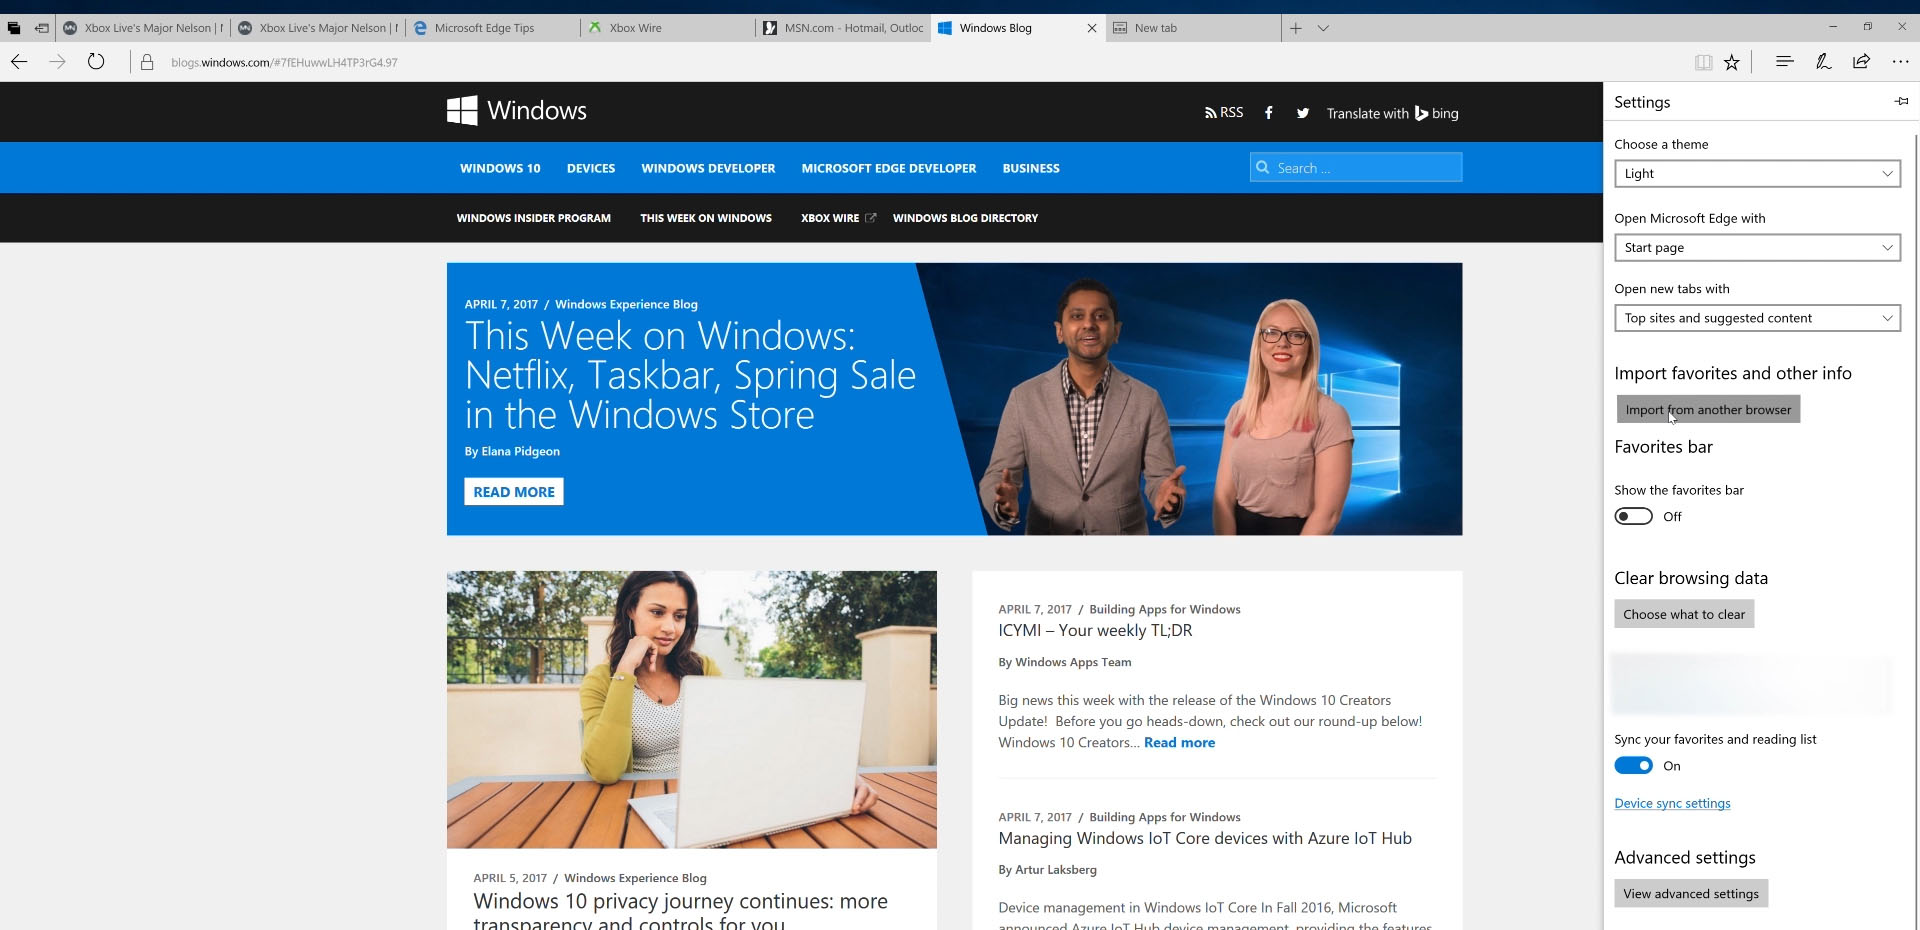 download and deploy the new microsoft edge for business